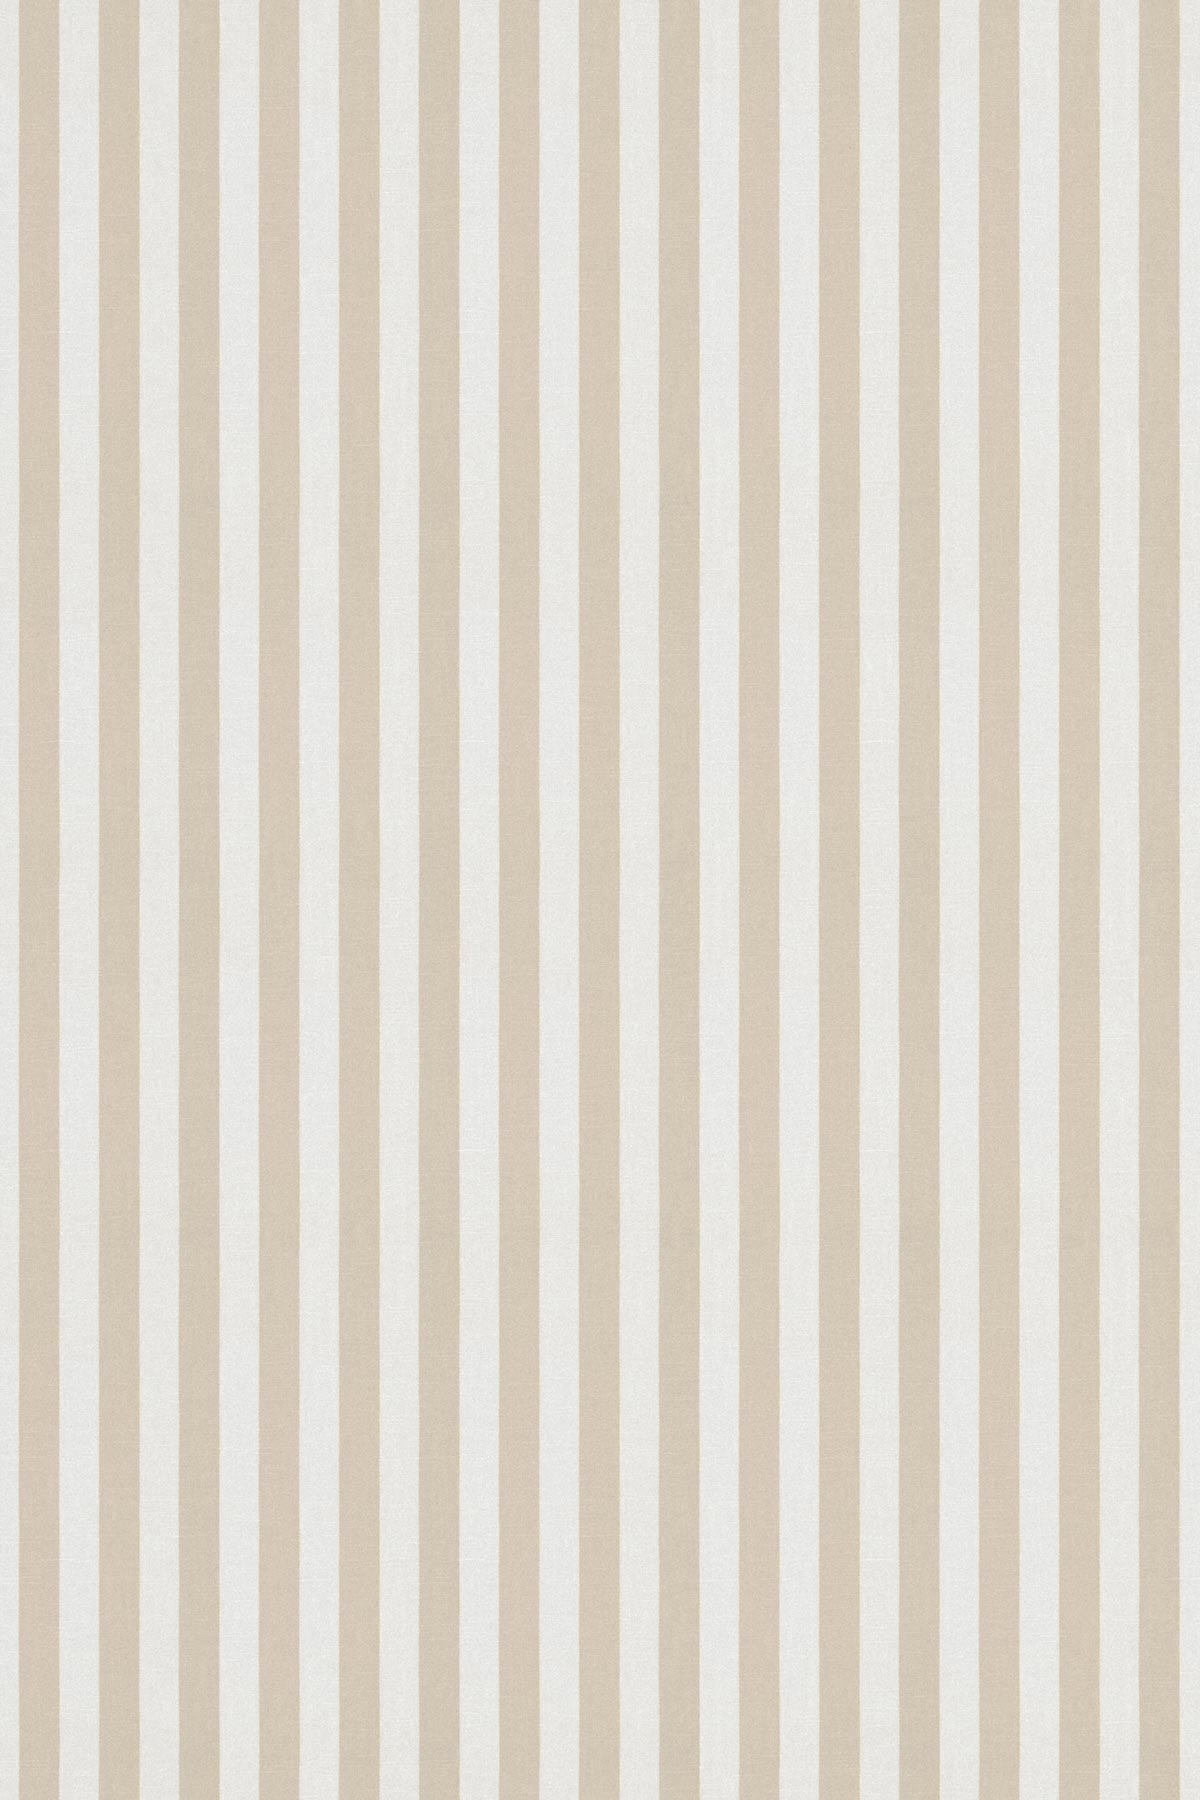 Carnival Stripe Fabric - Calico - by Harlequin